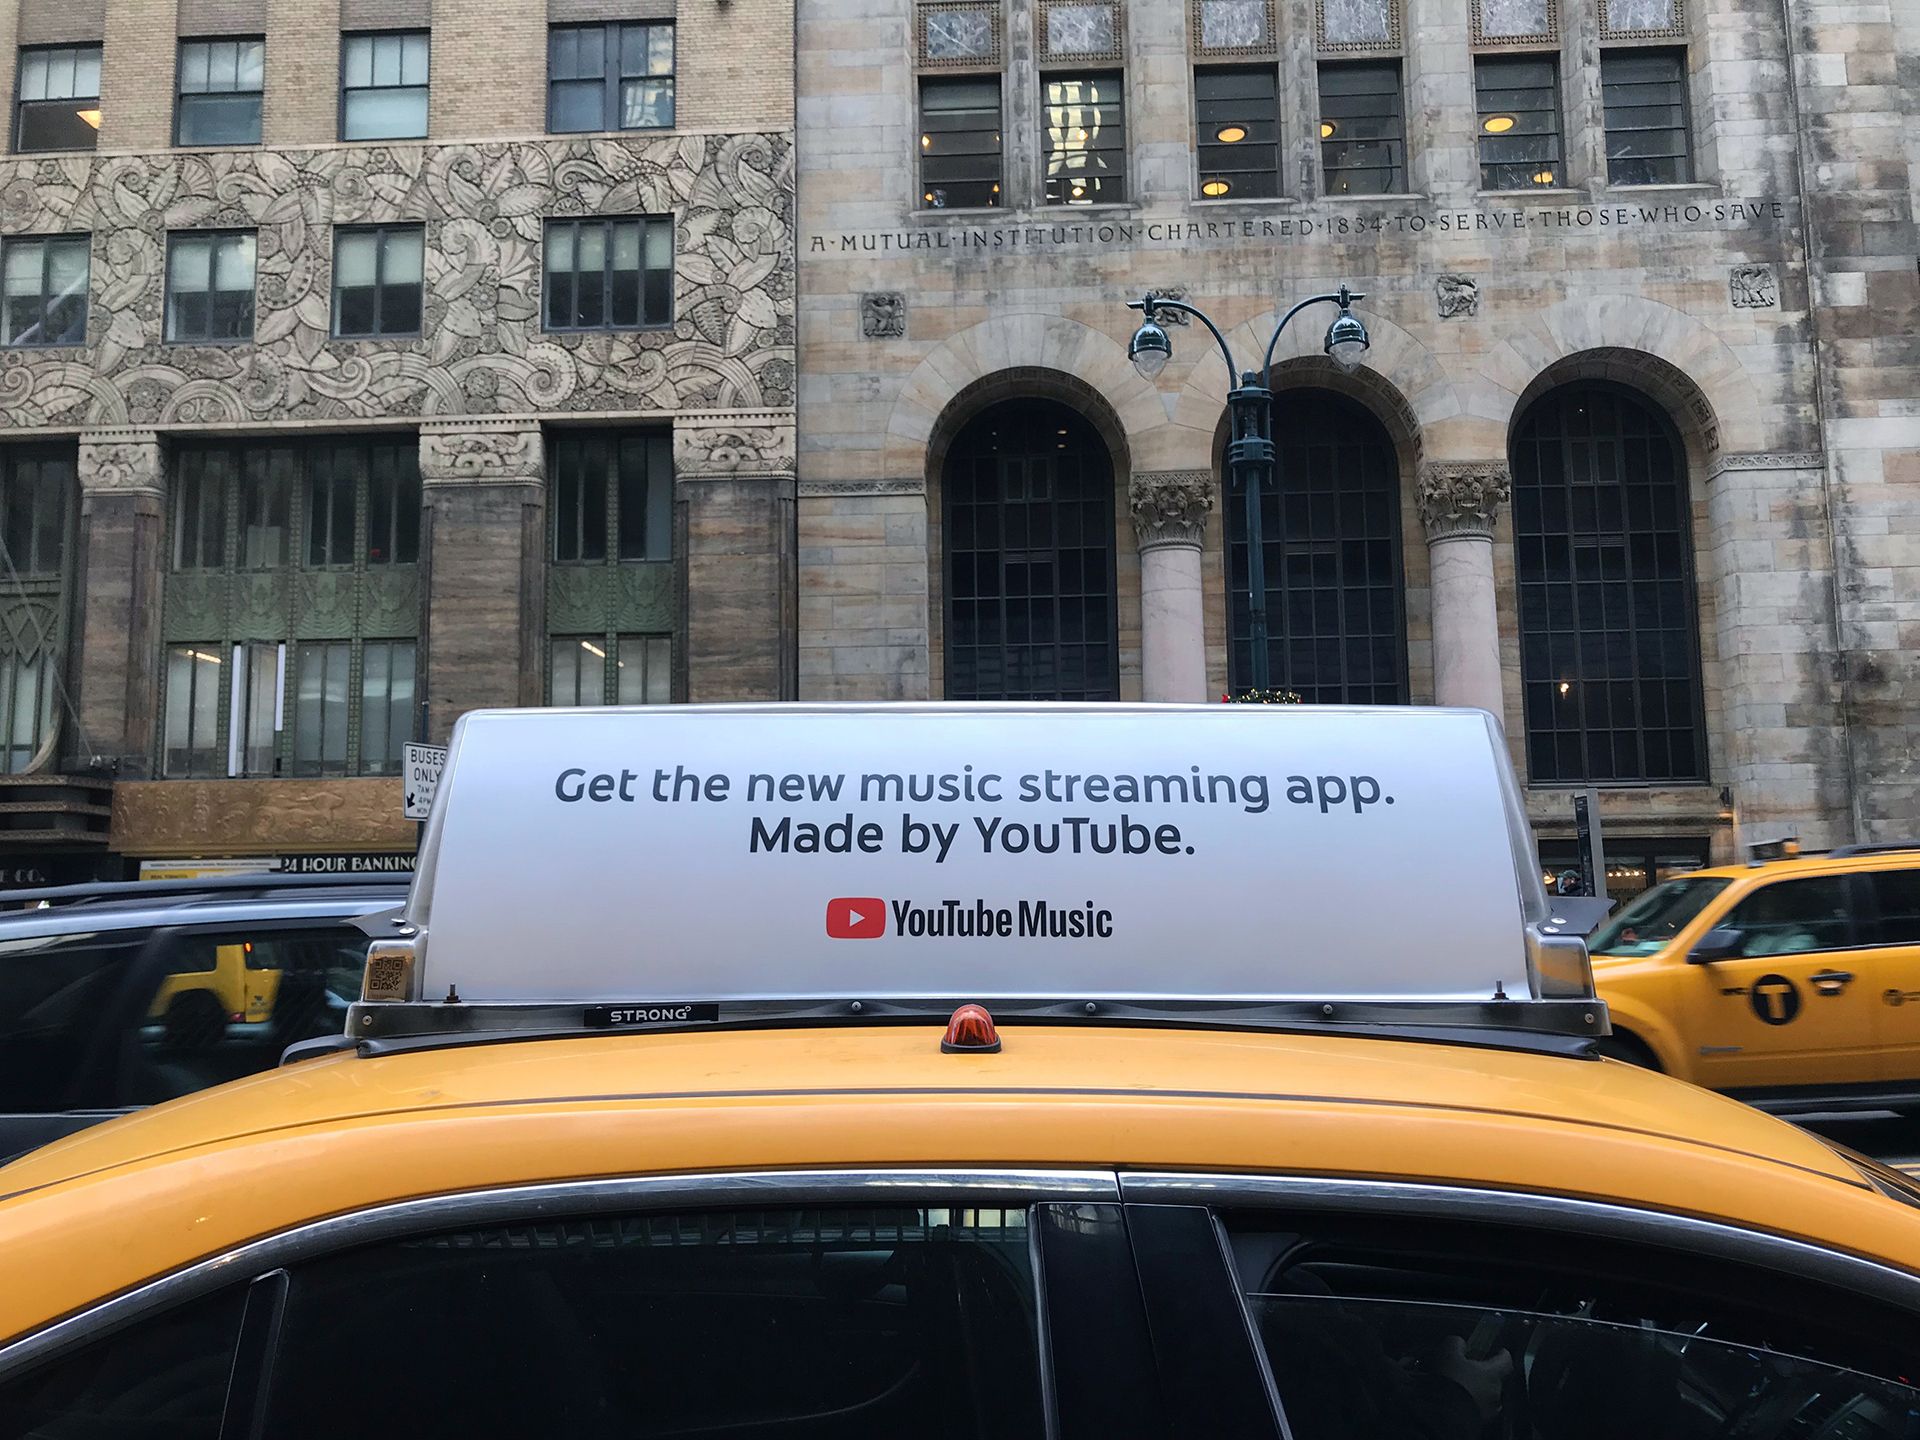 Ad on top of taxi says Get the new music streaming app.. Made by YouTube. YouTube Music